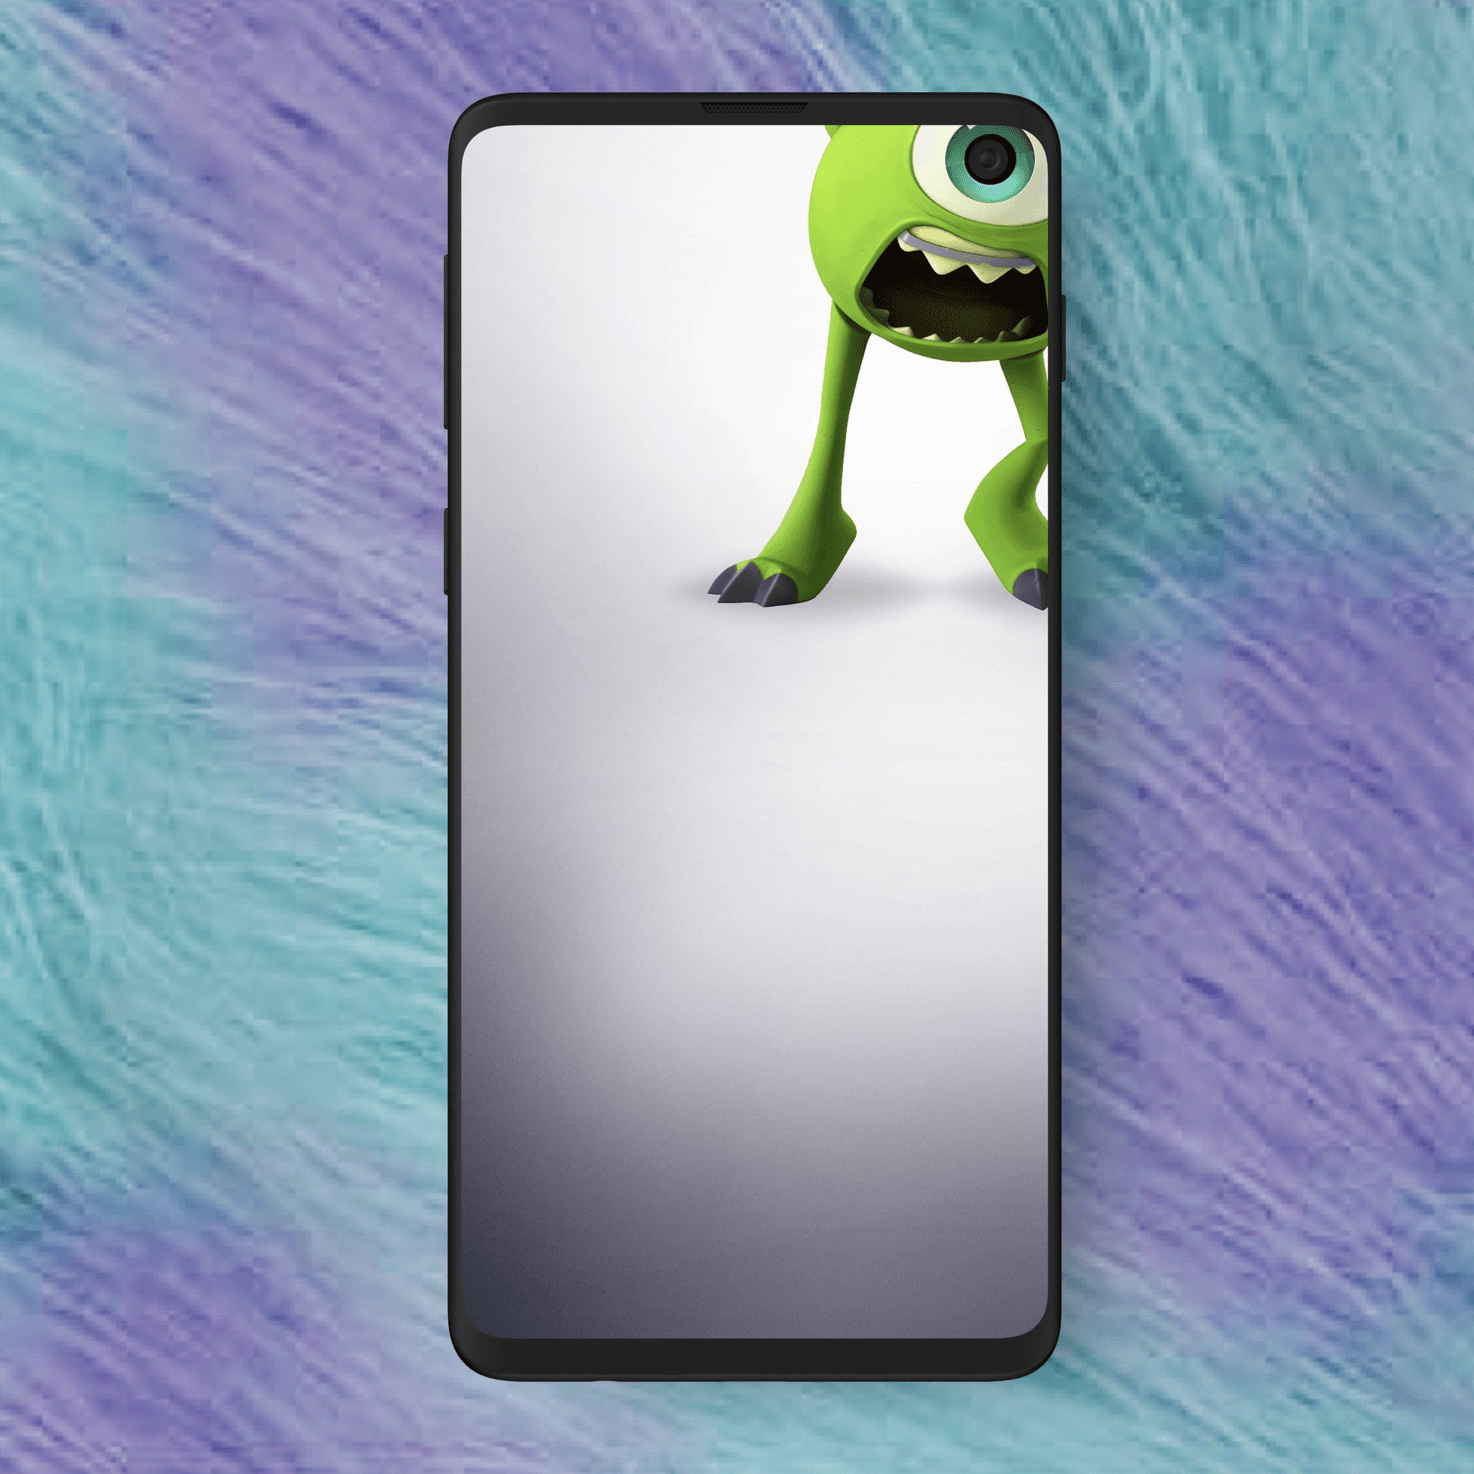 Download Camera Cut Out Wallpaper For Galaxy S S10+, S10E